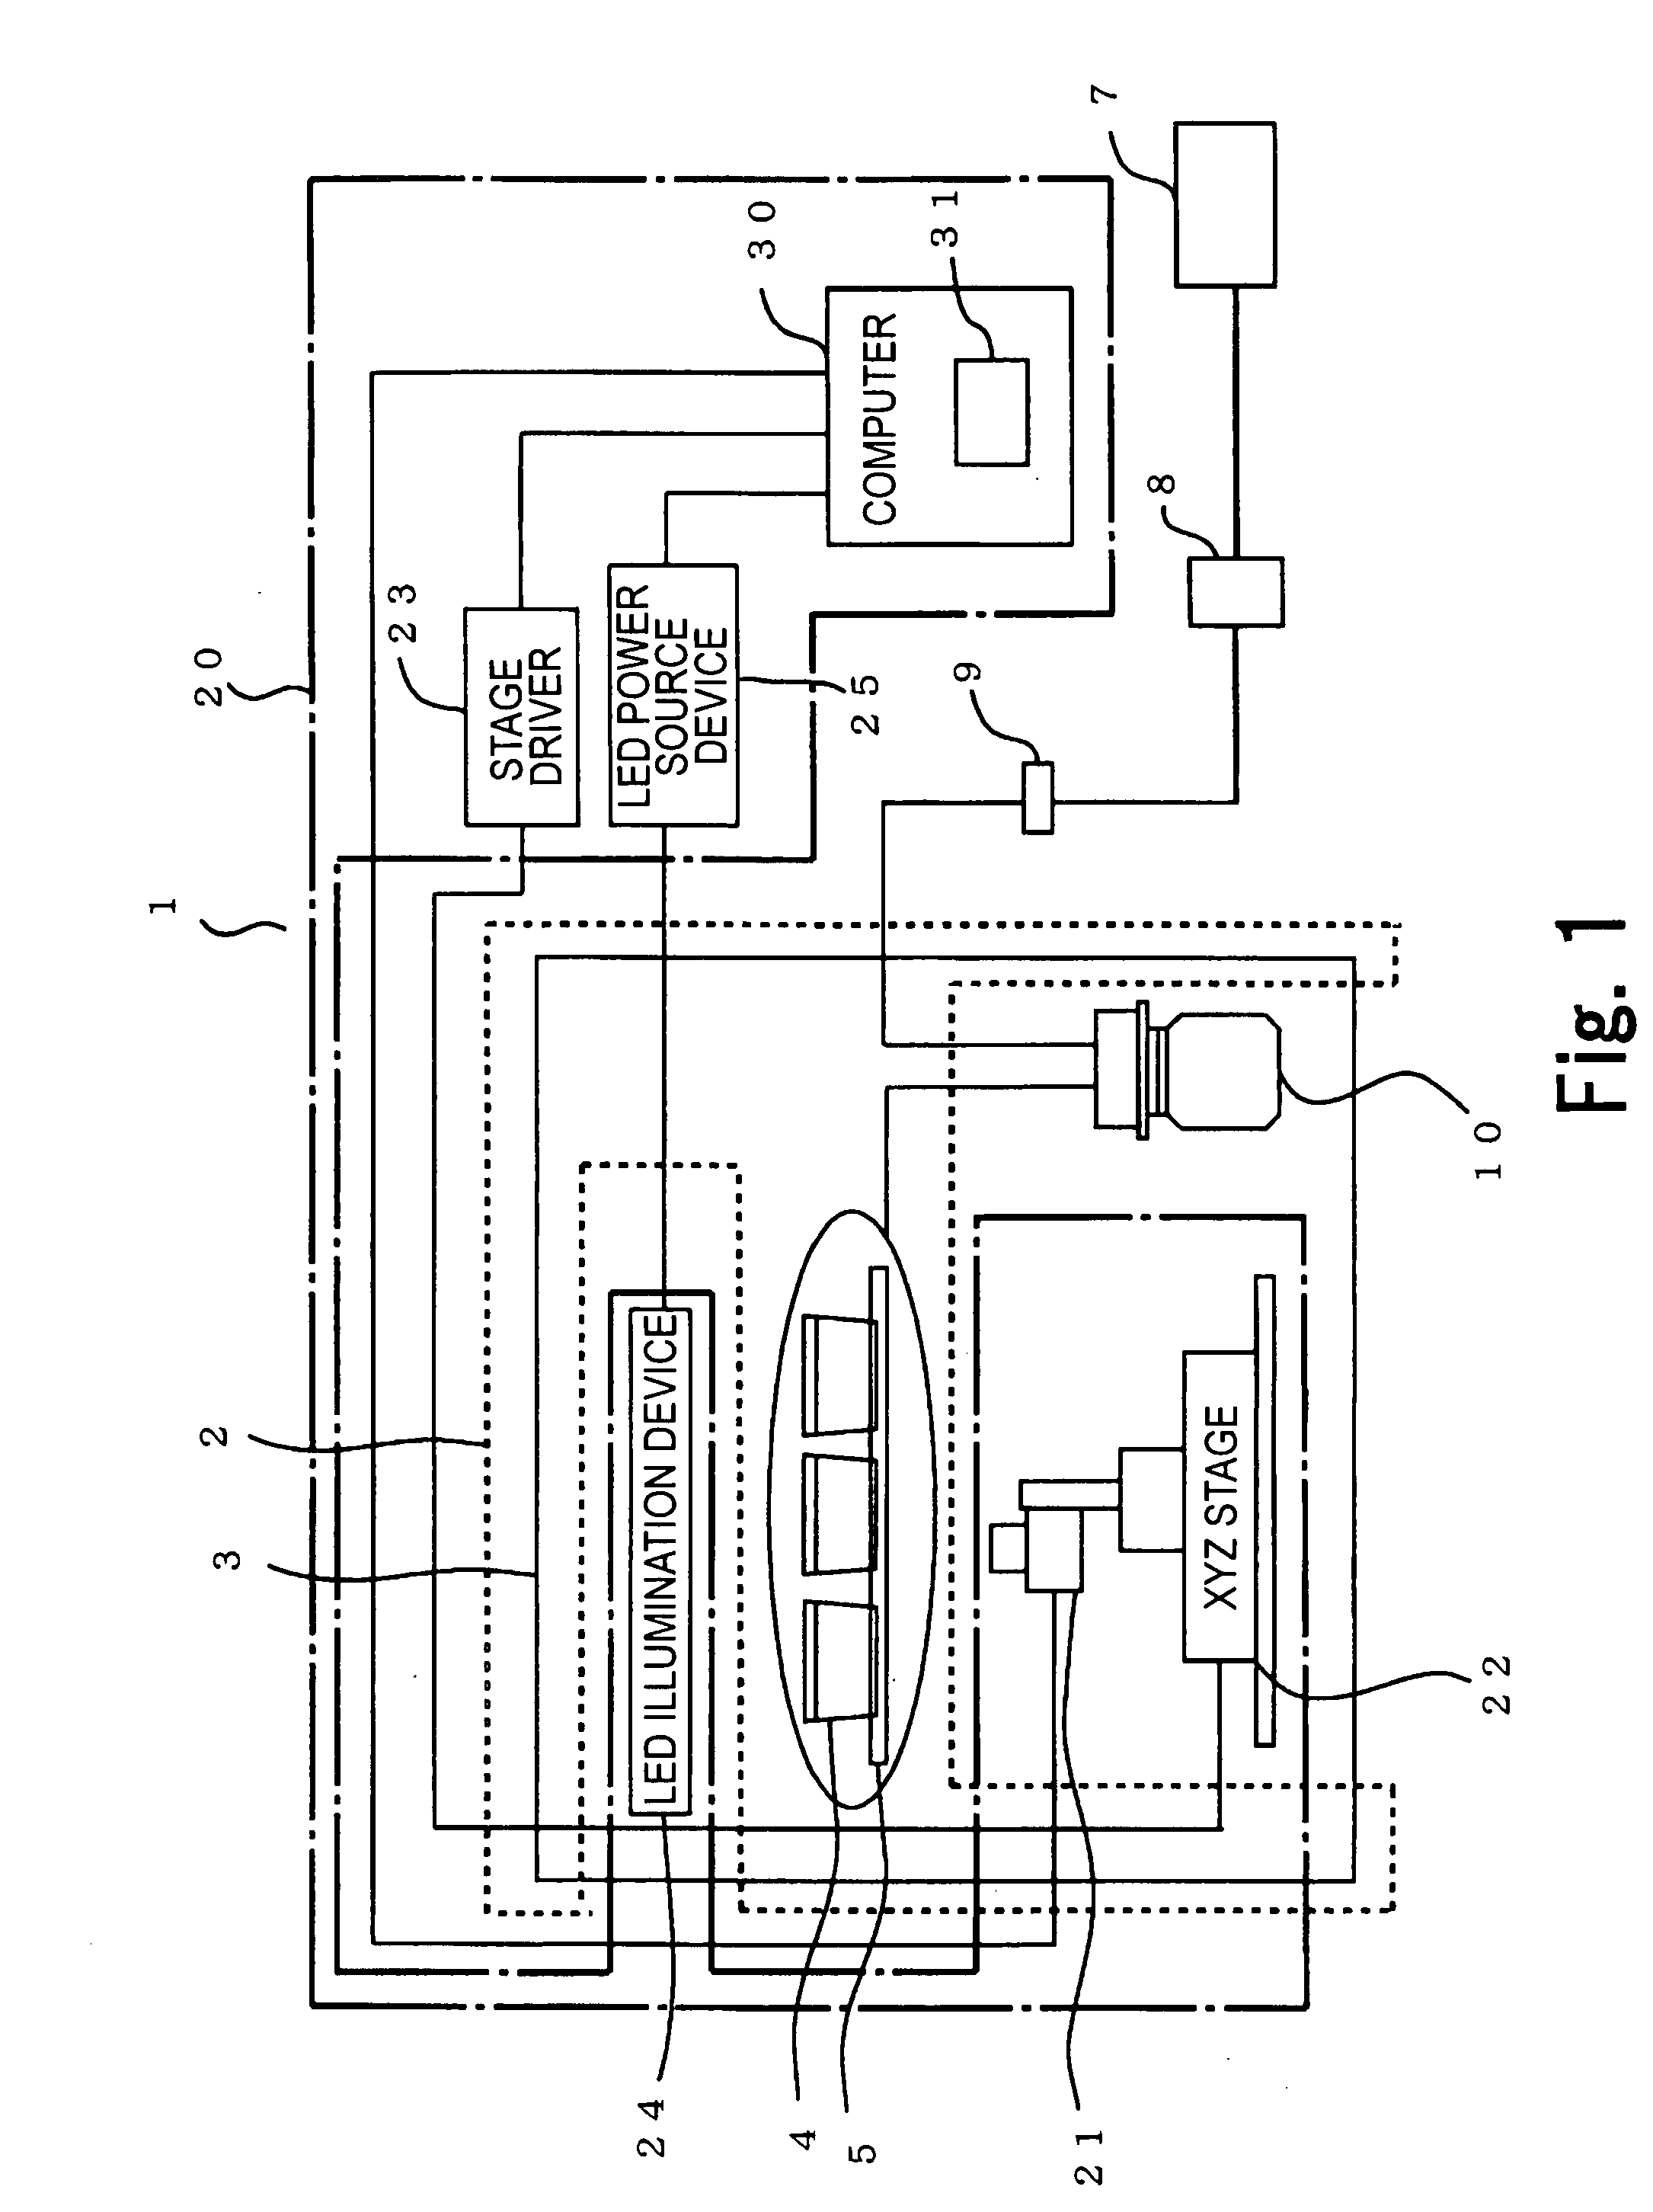 Cell Culture Evaluation System, Cell Culture Evaluation Method, and Cell Culture Evaluation Program